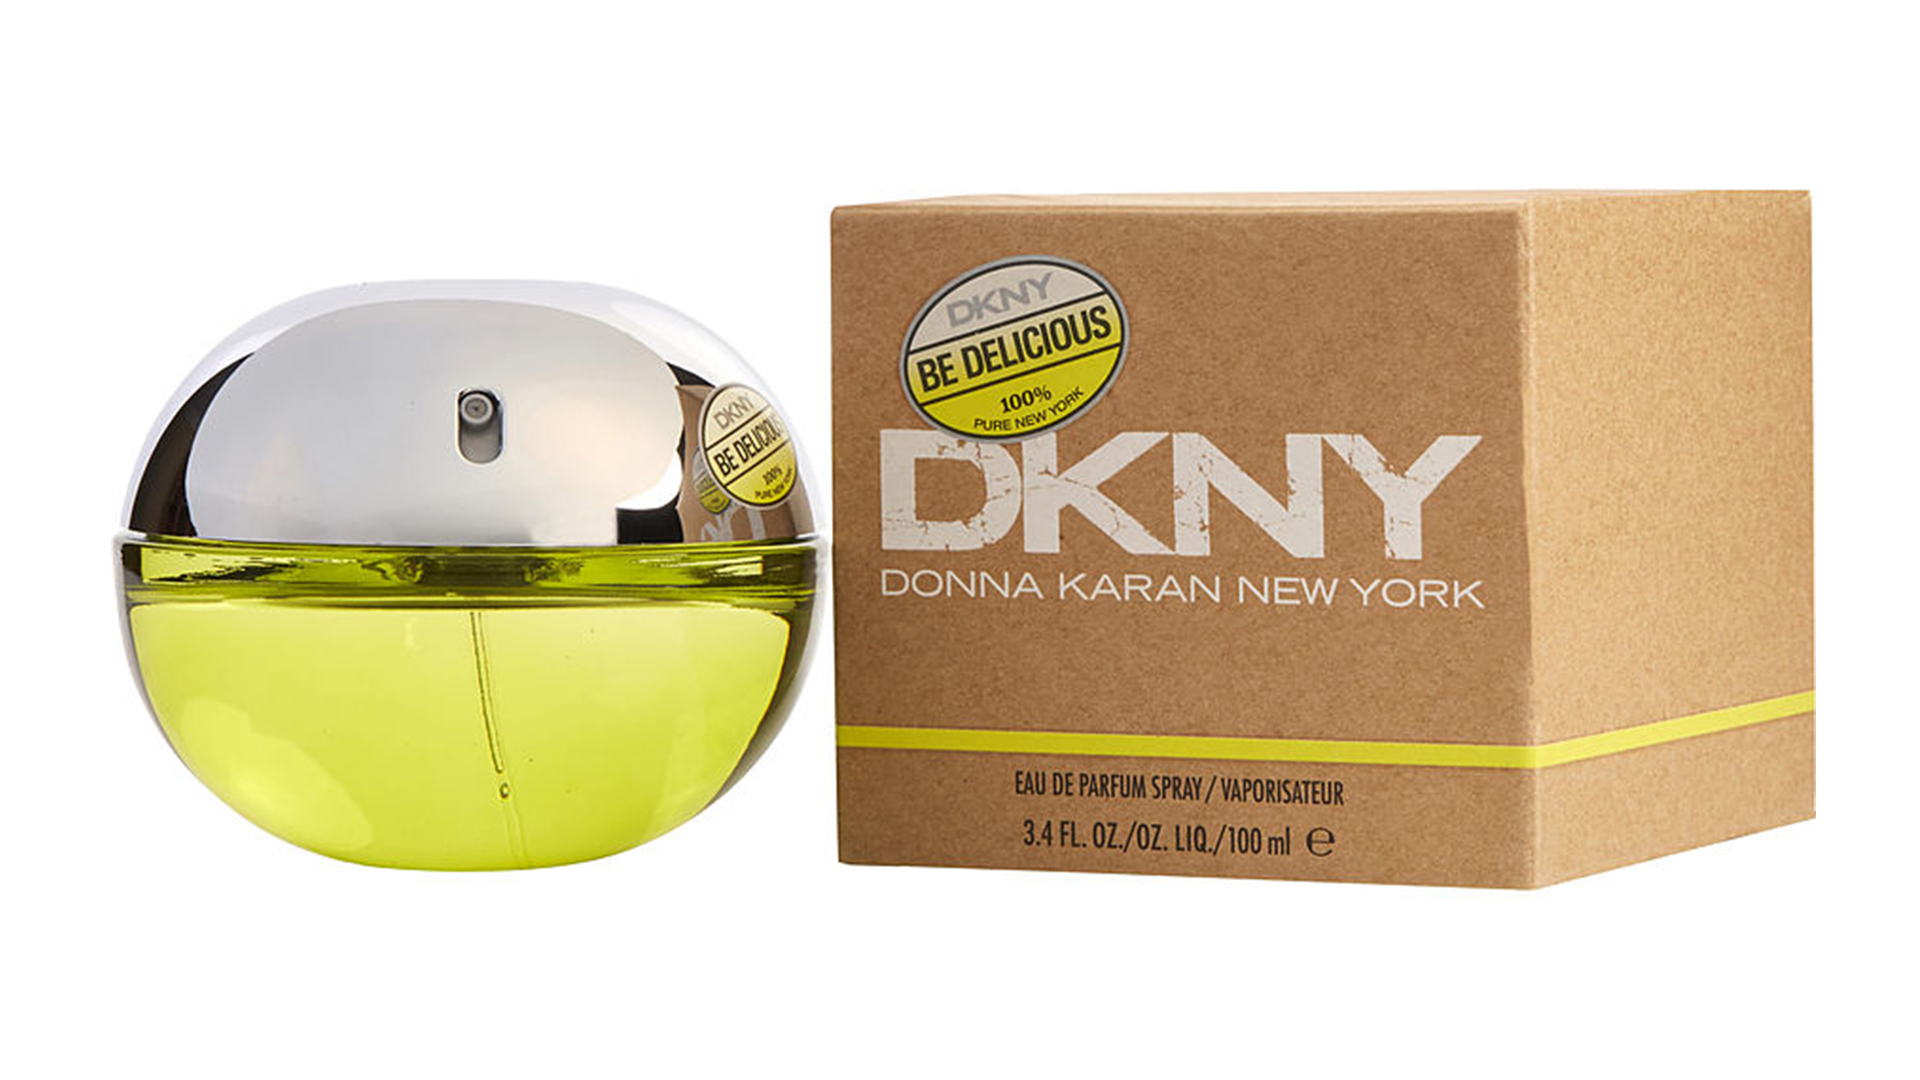 DKNY, Brands of the World™